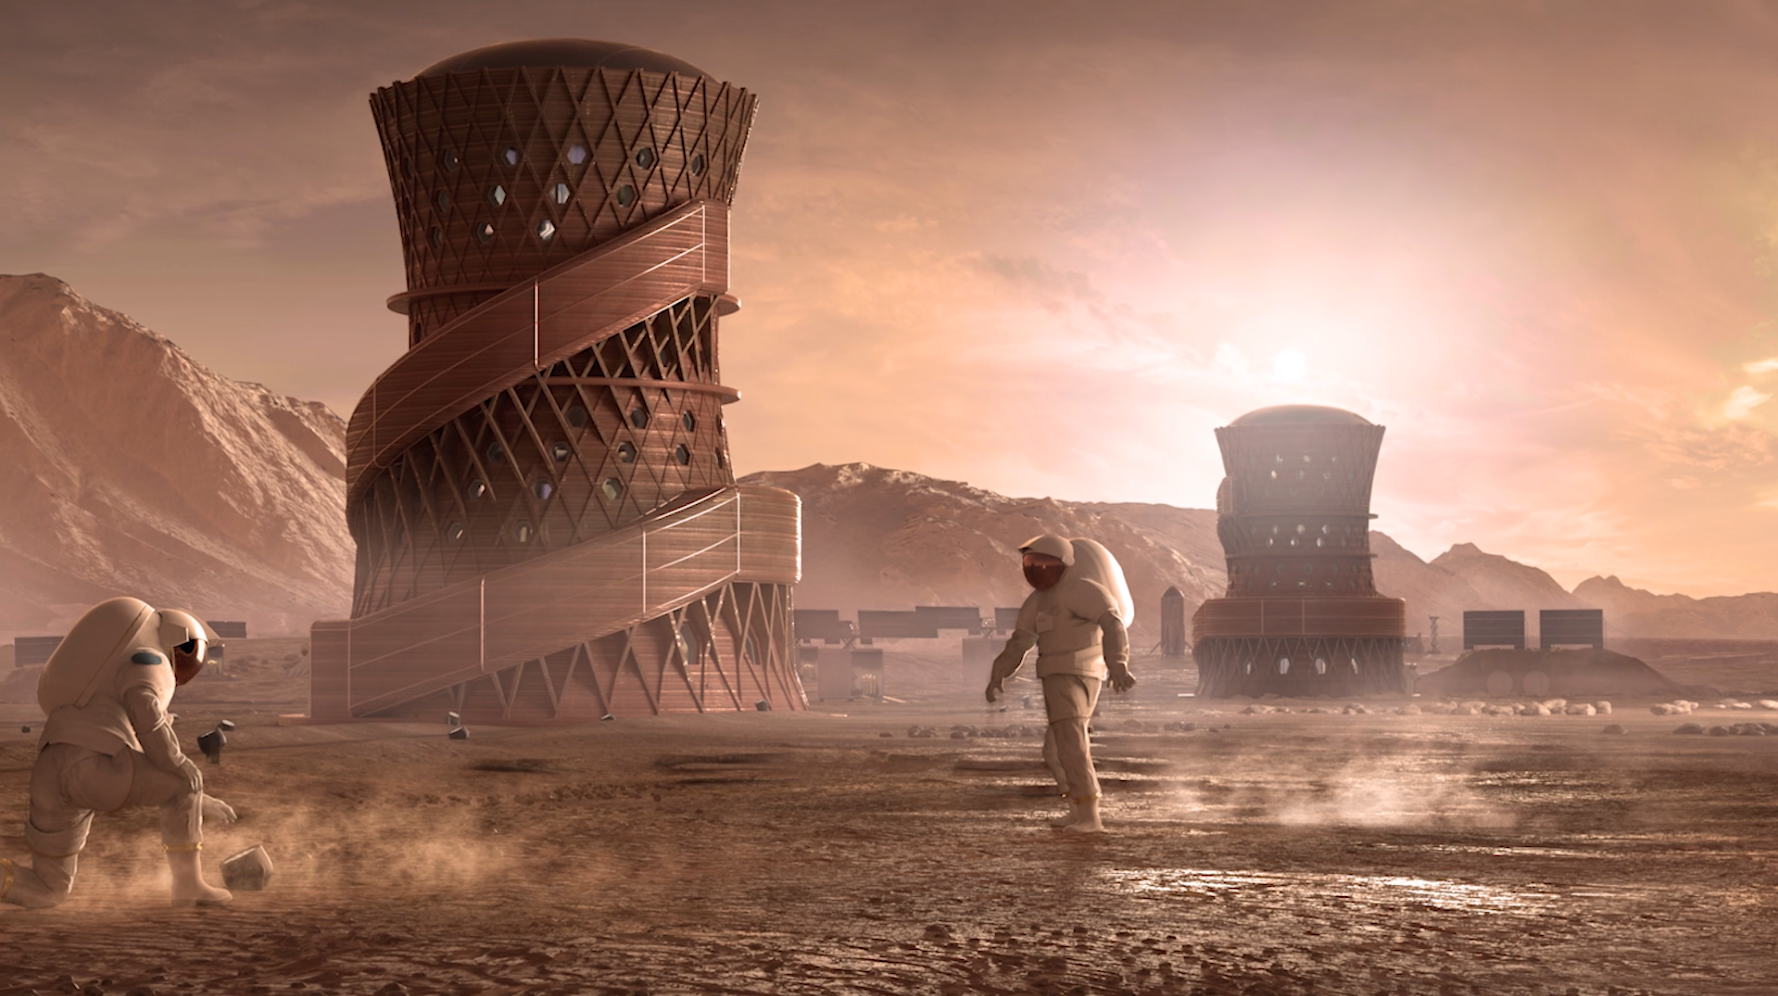 And finally... NASA unveils winners of 3D-printed habitat challenge competition